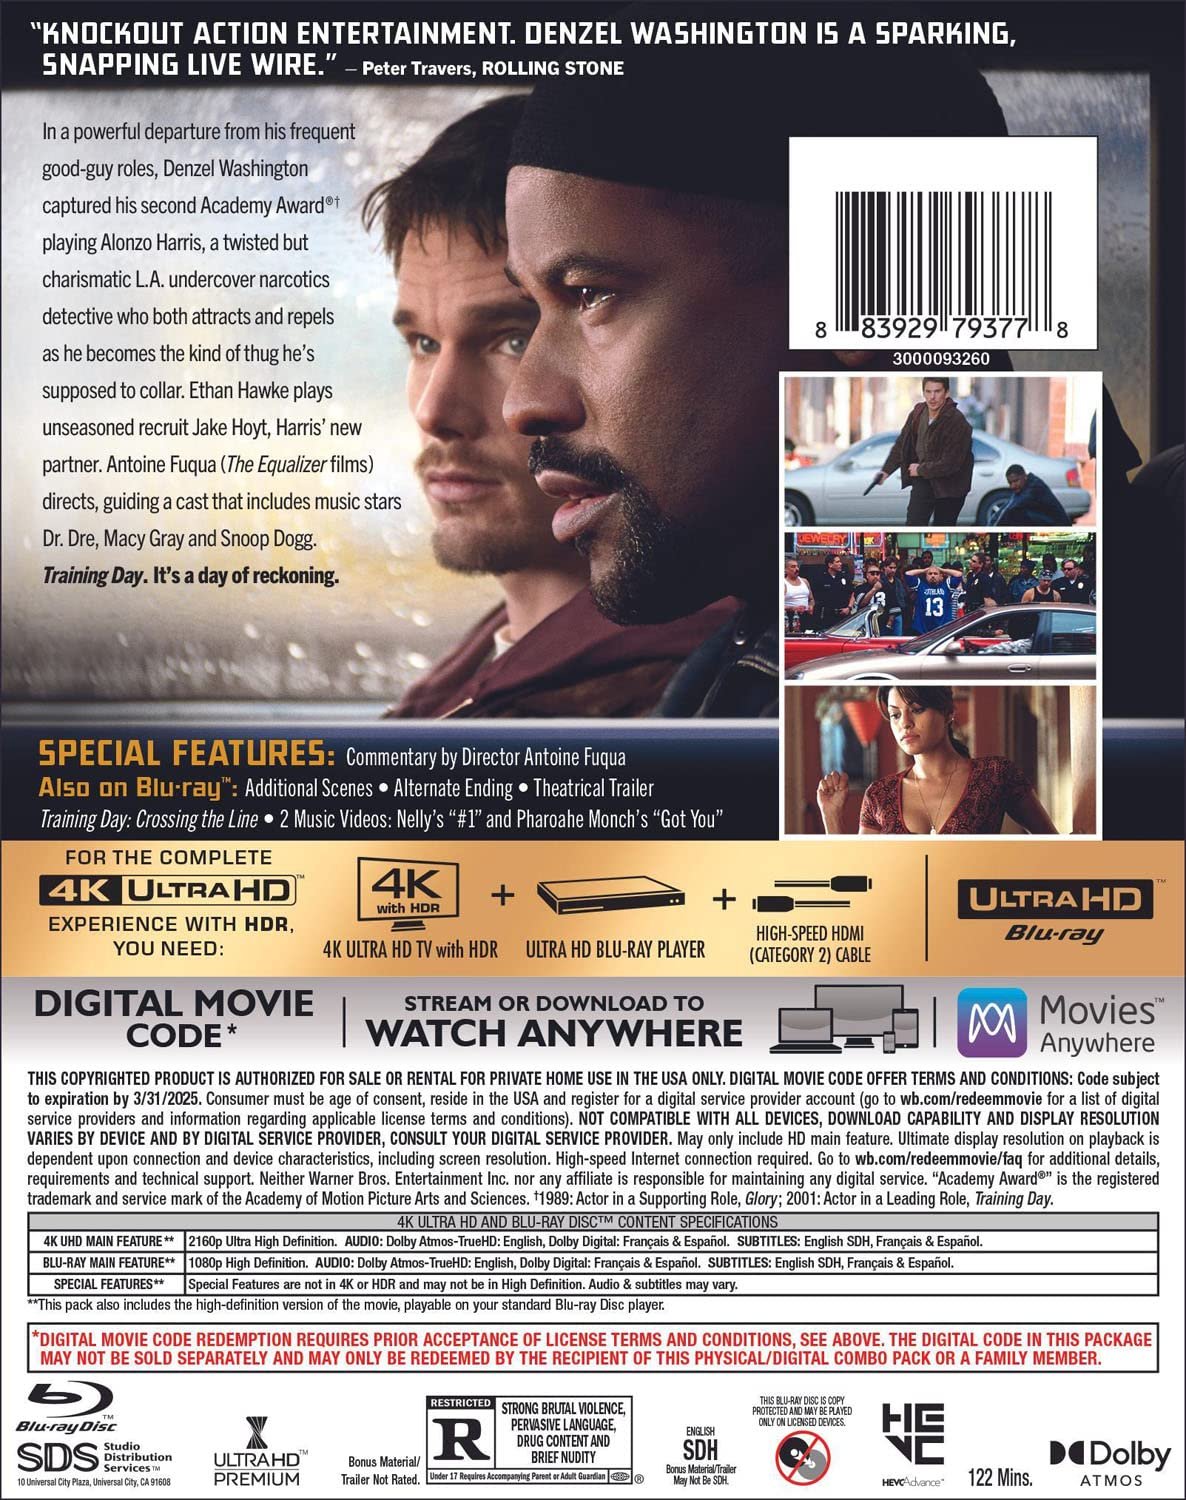 The image is the cover of the Training Day (4K Ultra HD + Blu-ray + Digital) movie titled "Knockout Action Entertainment. Denzel Washington and Ethan Hawke go undercover." It features movie scenes, actor.